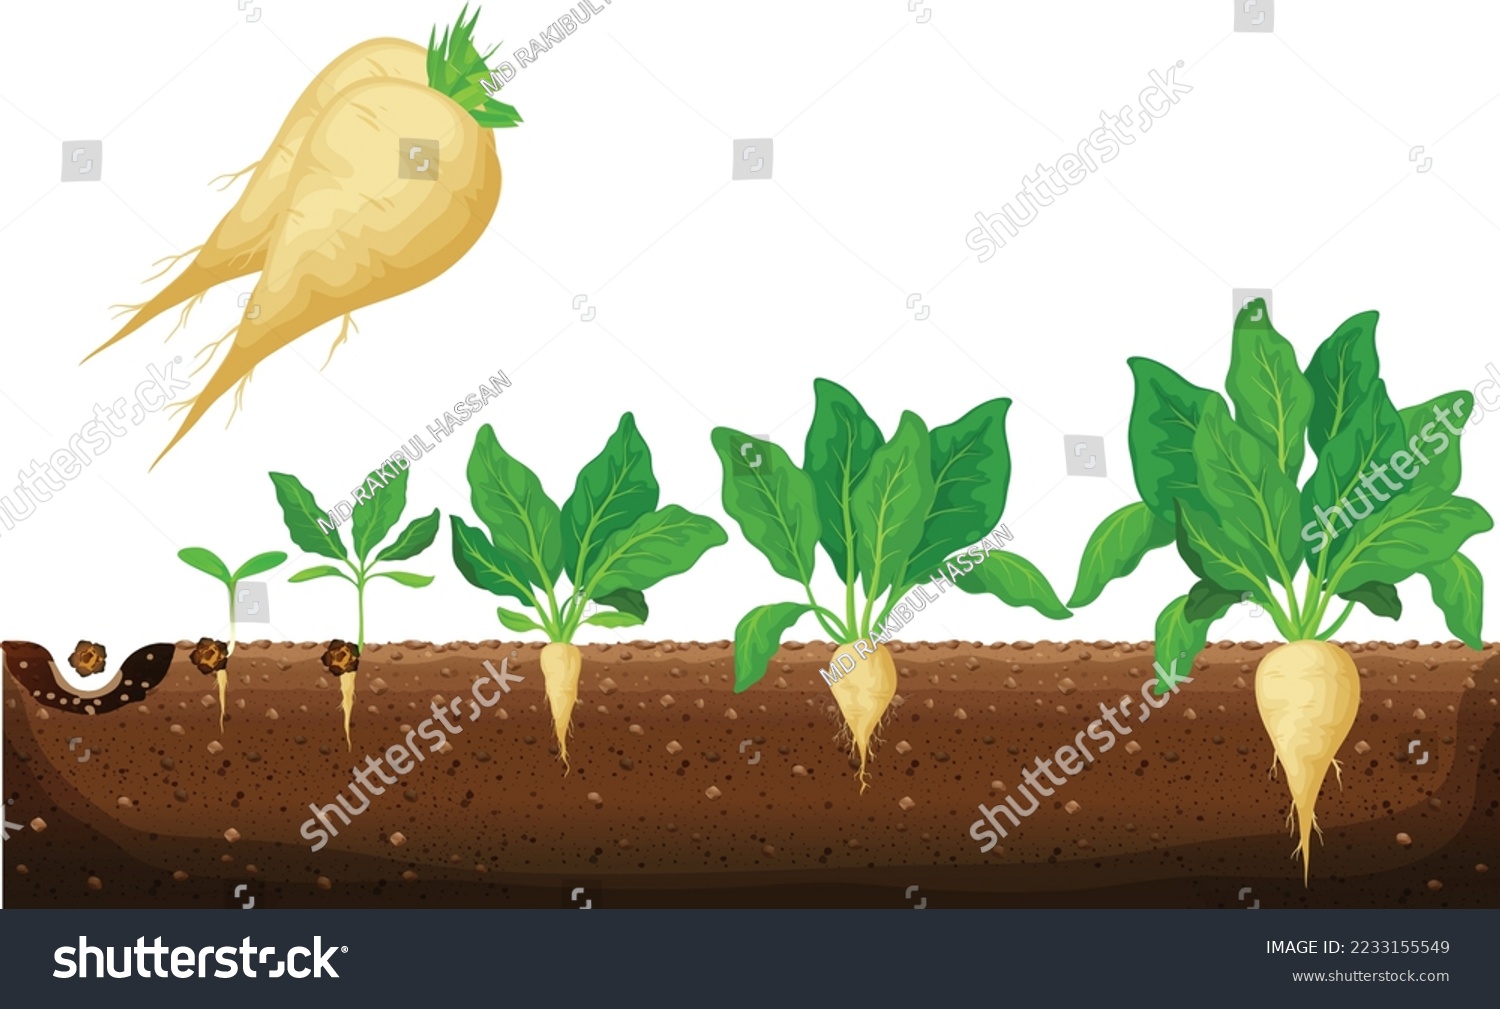 Sugar beet growth stages infographic. Development and productivity of sugar beet. The growth process of sugar beet from seeds, and sprouts to mature plant with ripe fruit vector illustration #2233155549